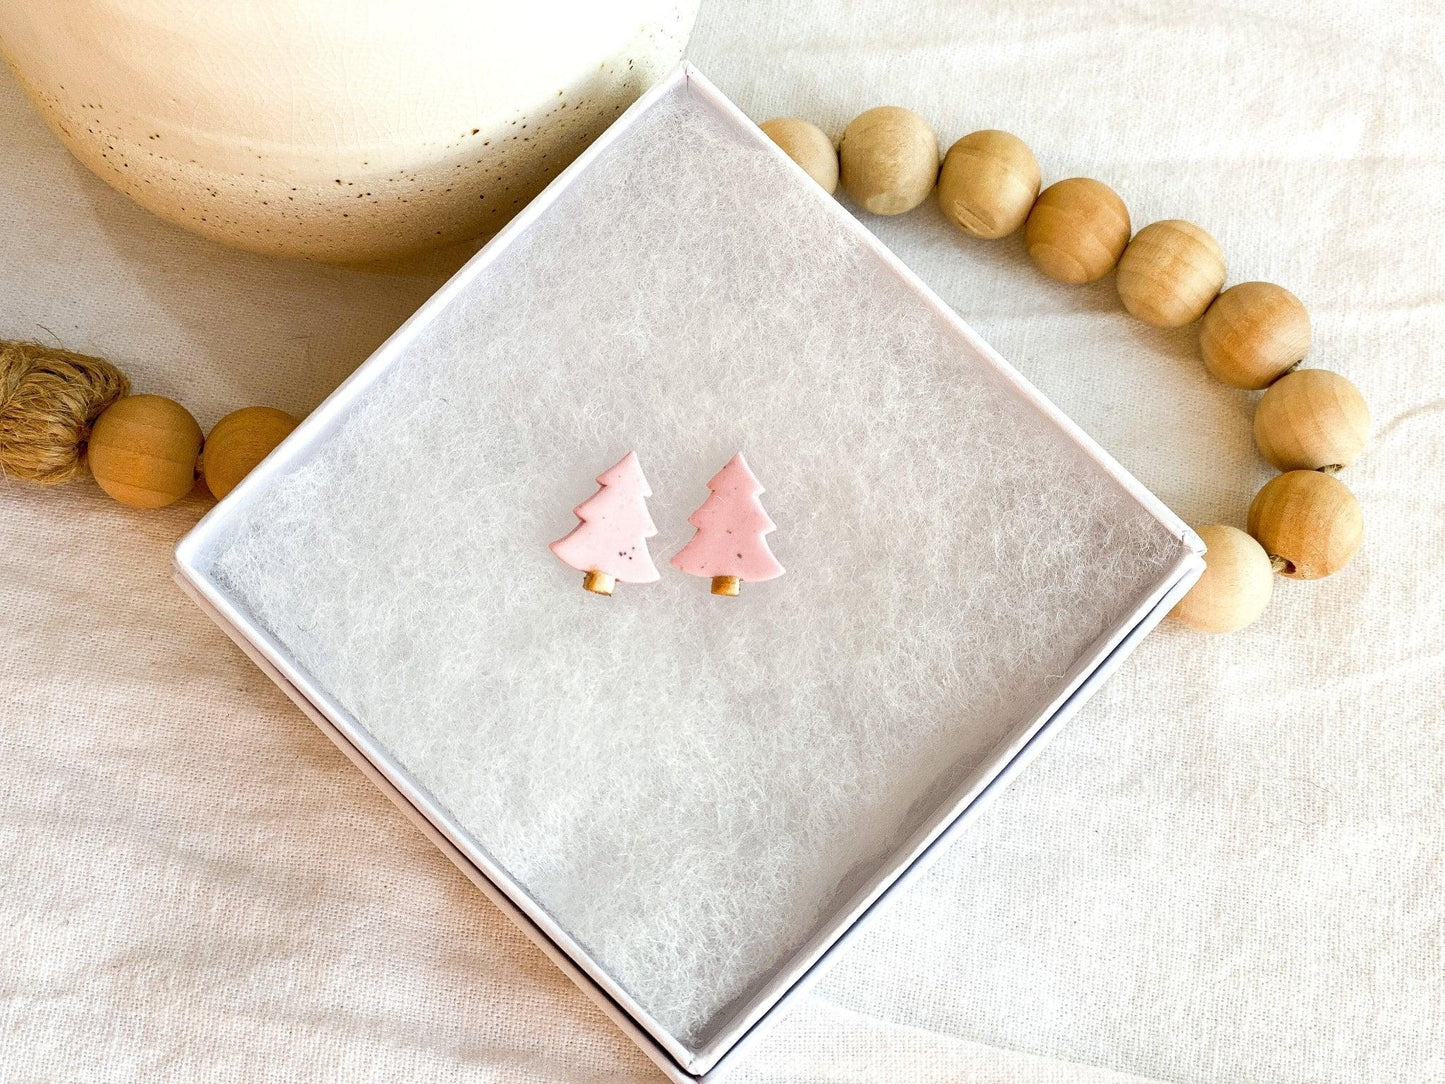 Light Pink Earrings shaped like Christmas trees made out of polymer clay and surgical steel posts in white gift box